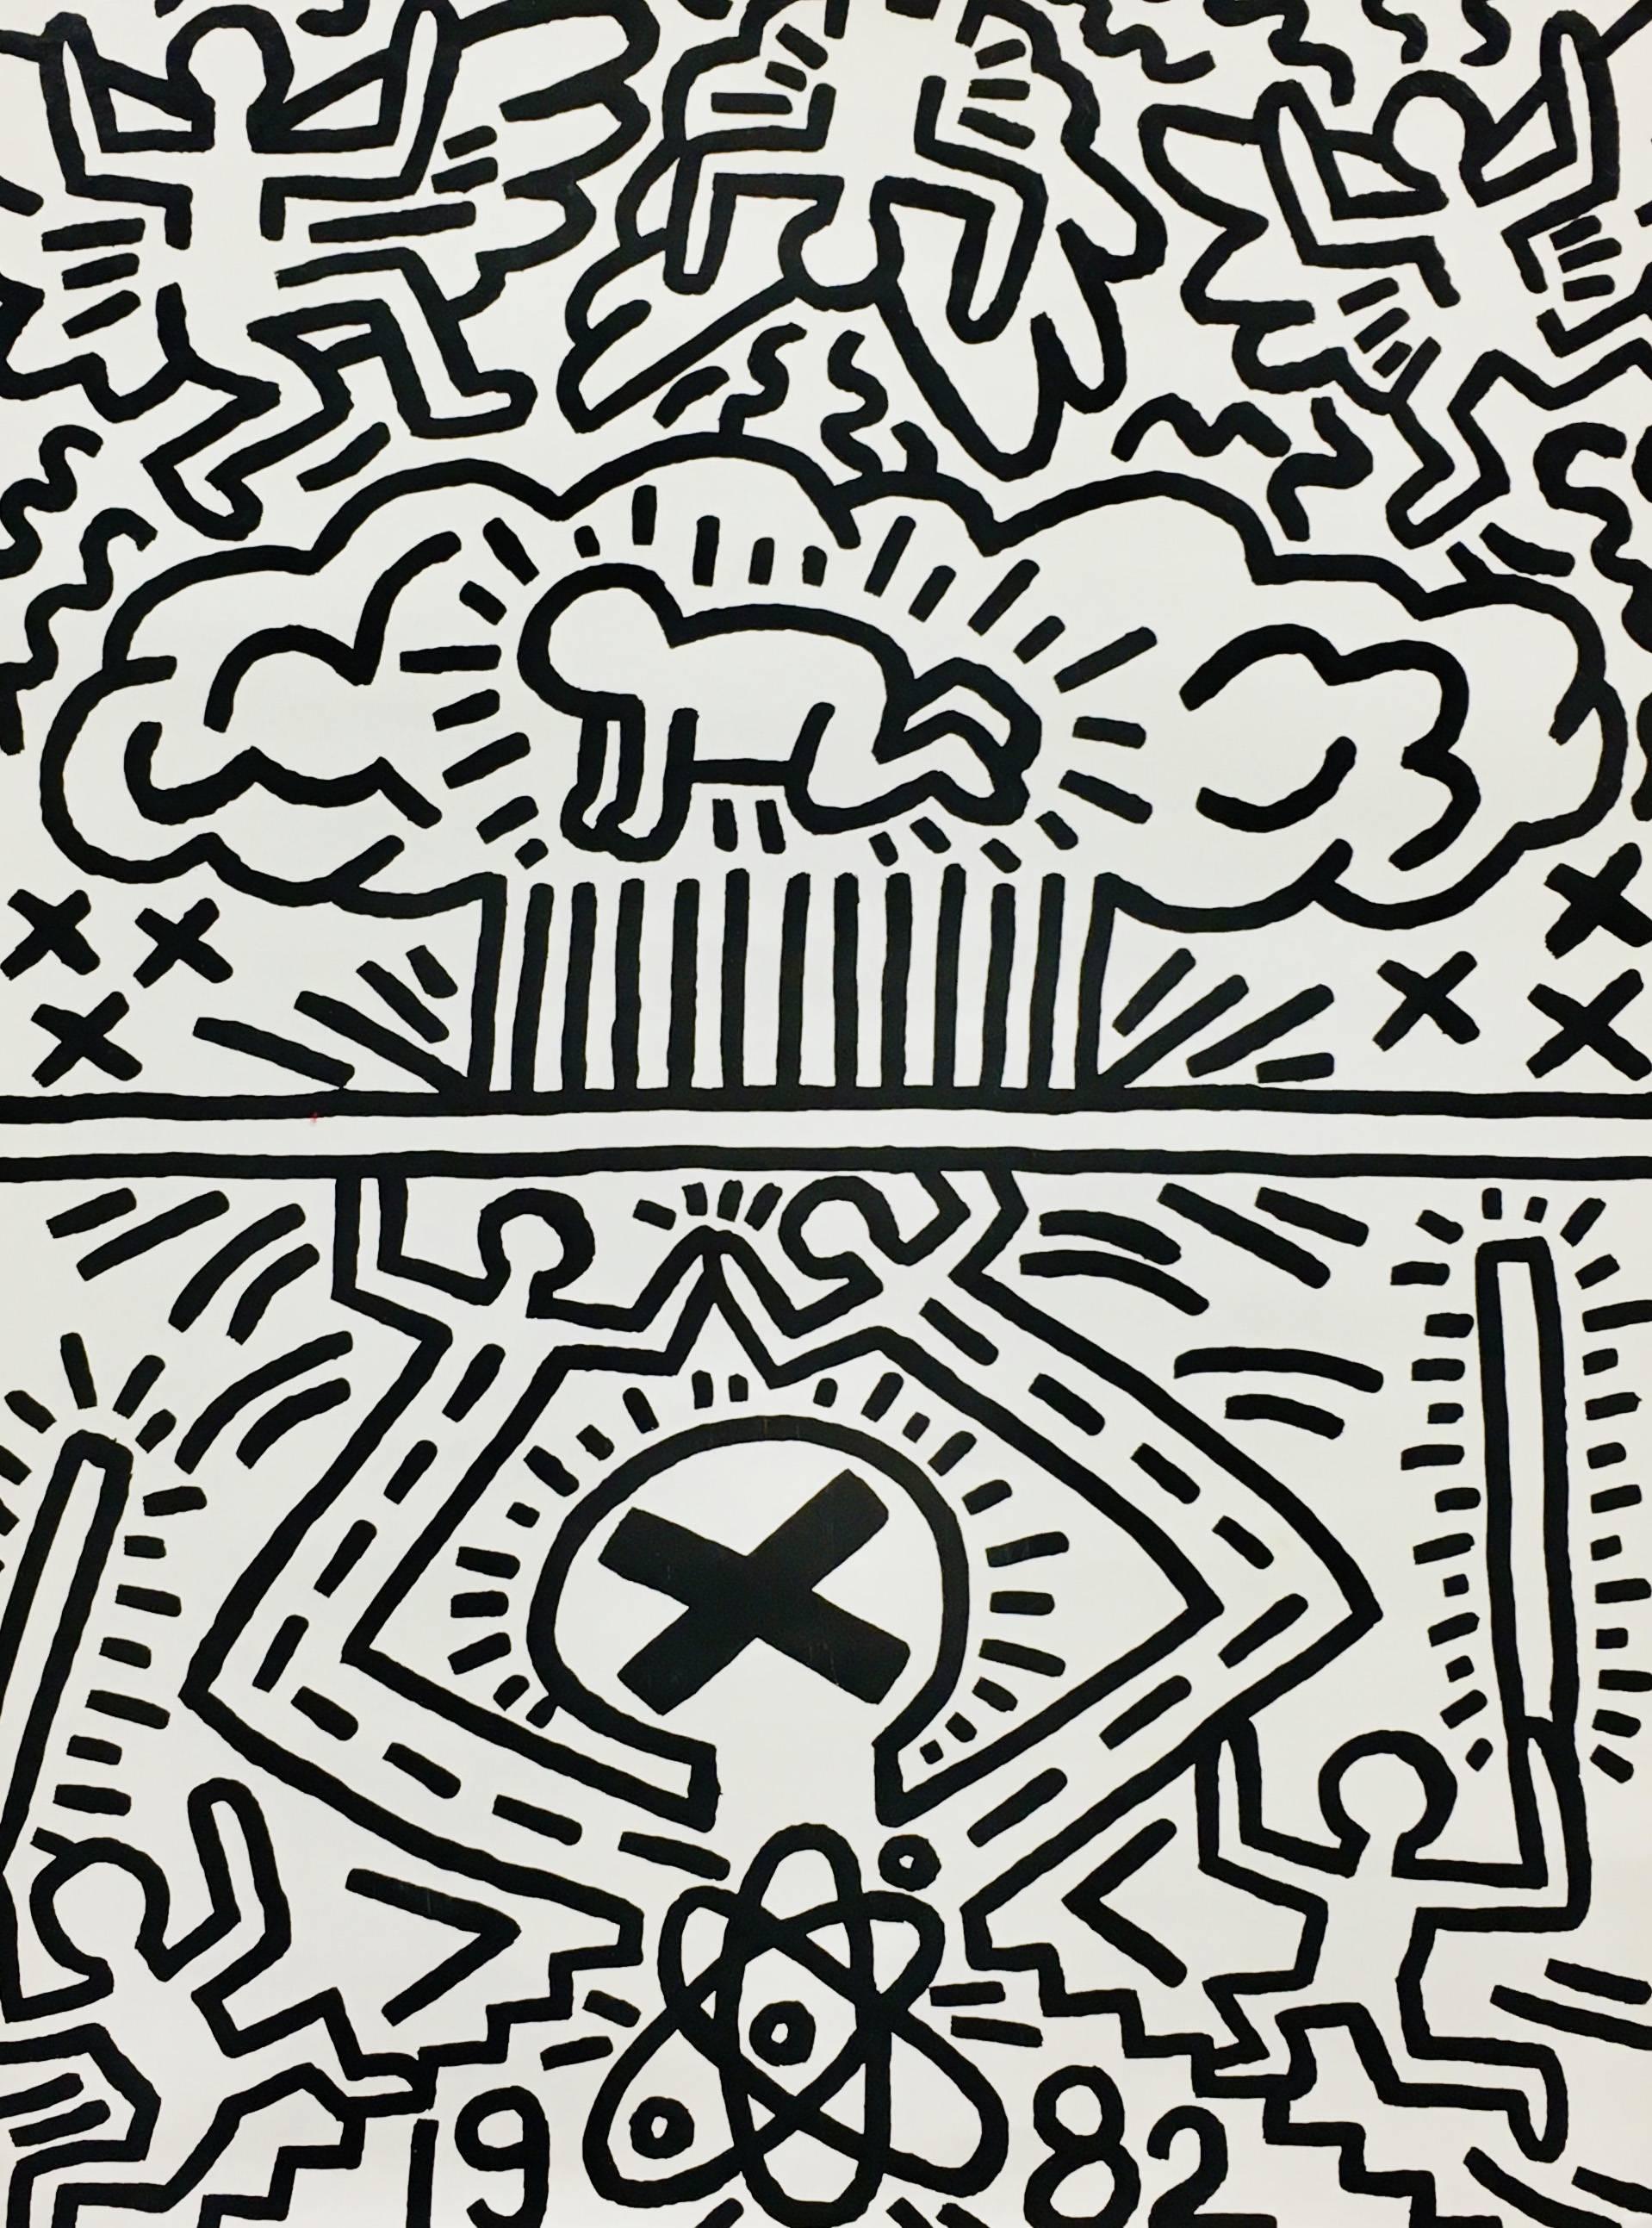 Nuclear Disarmament poster  - Print by Keith Haring